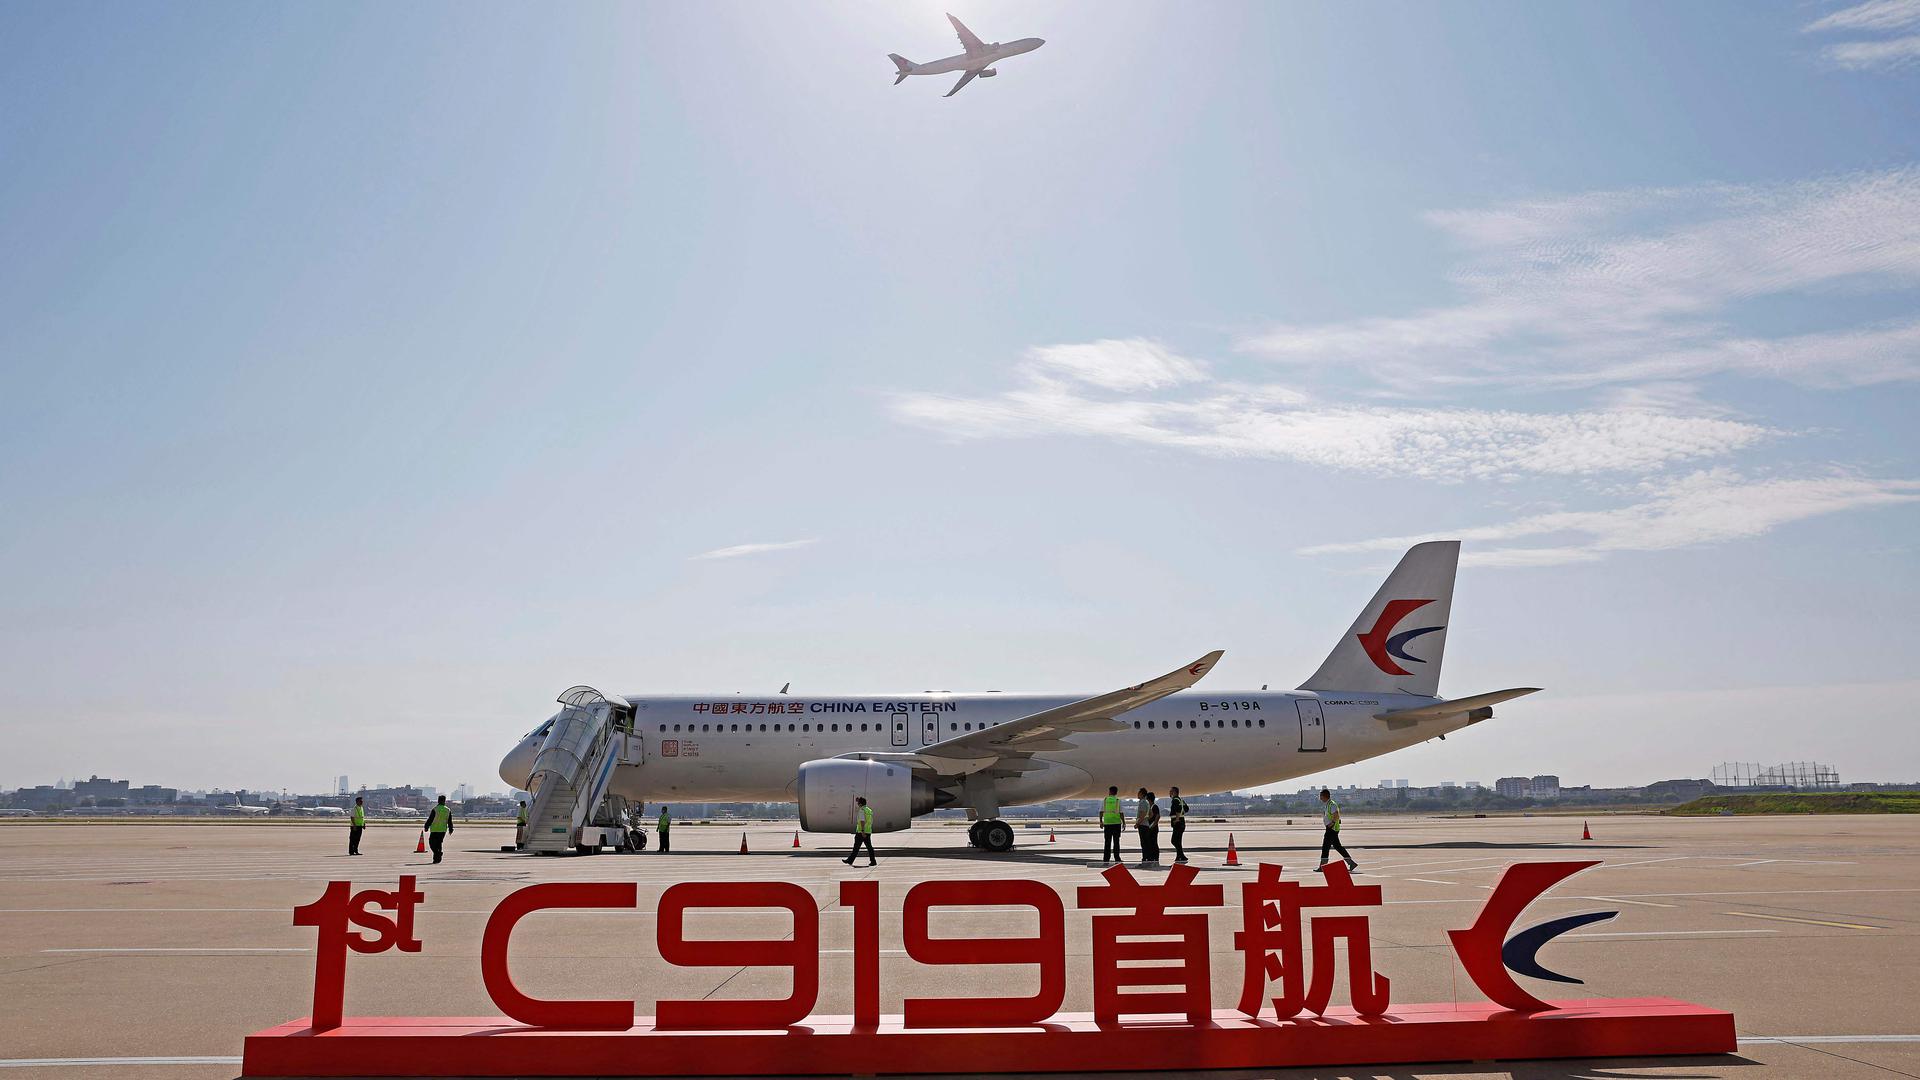 China's first domestically produced passenger jet C919 is seen before its first commercial flight from Shanghai to Beijing, at Shanghai Hongqiao Airport on May 28, 2023. China's first domestically produced passenger jet took off on its maiden commercial flight on May 28, a milestone event in the nation's decades-long effort to compete with Western rivals in the air. (Photo by AFP) / China OUT